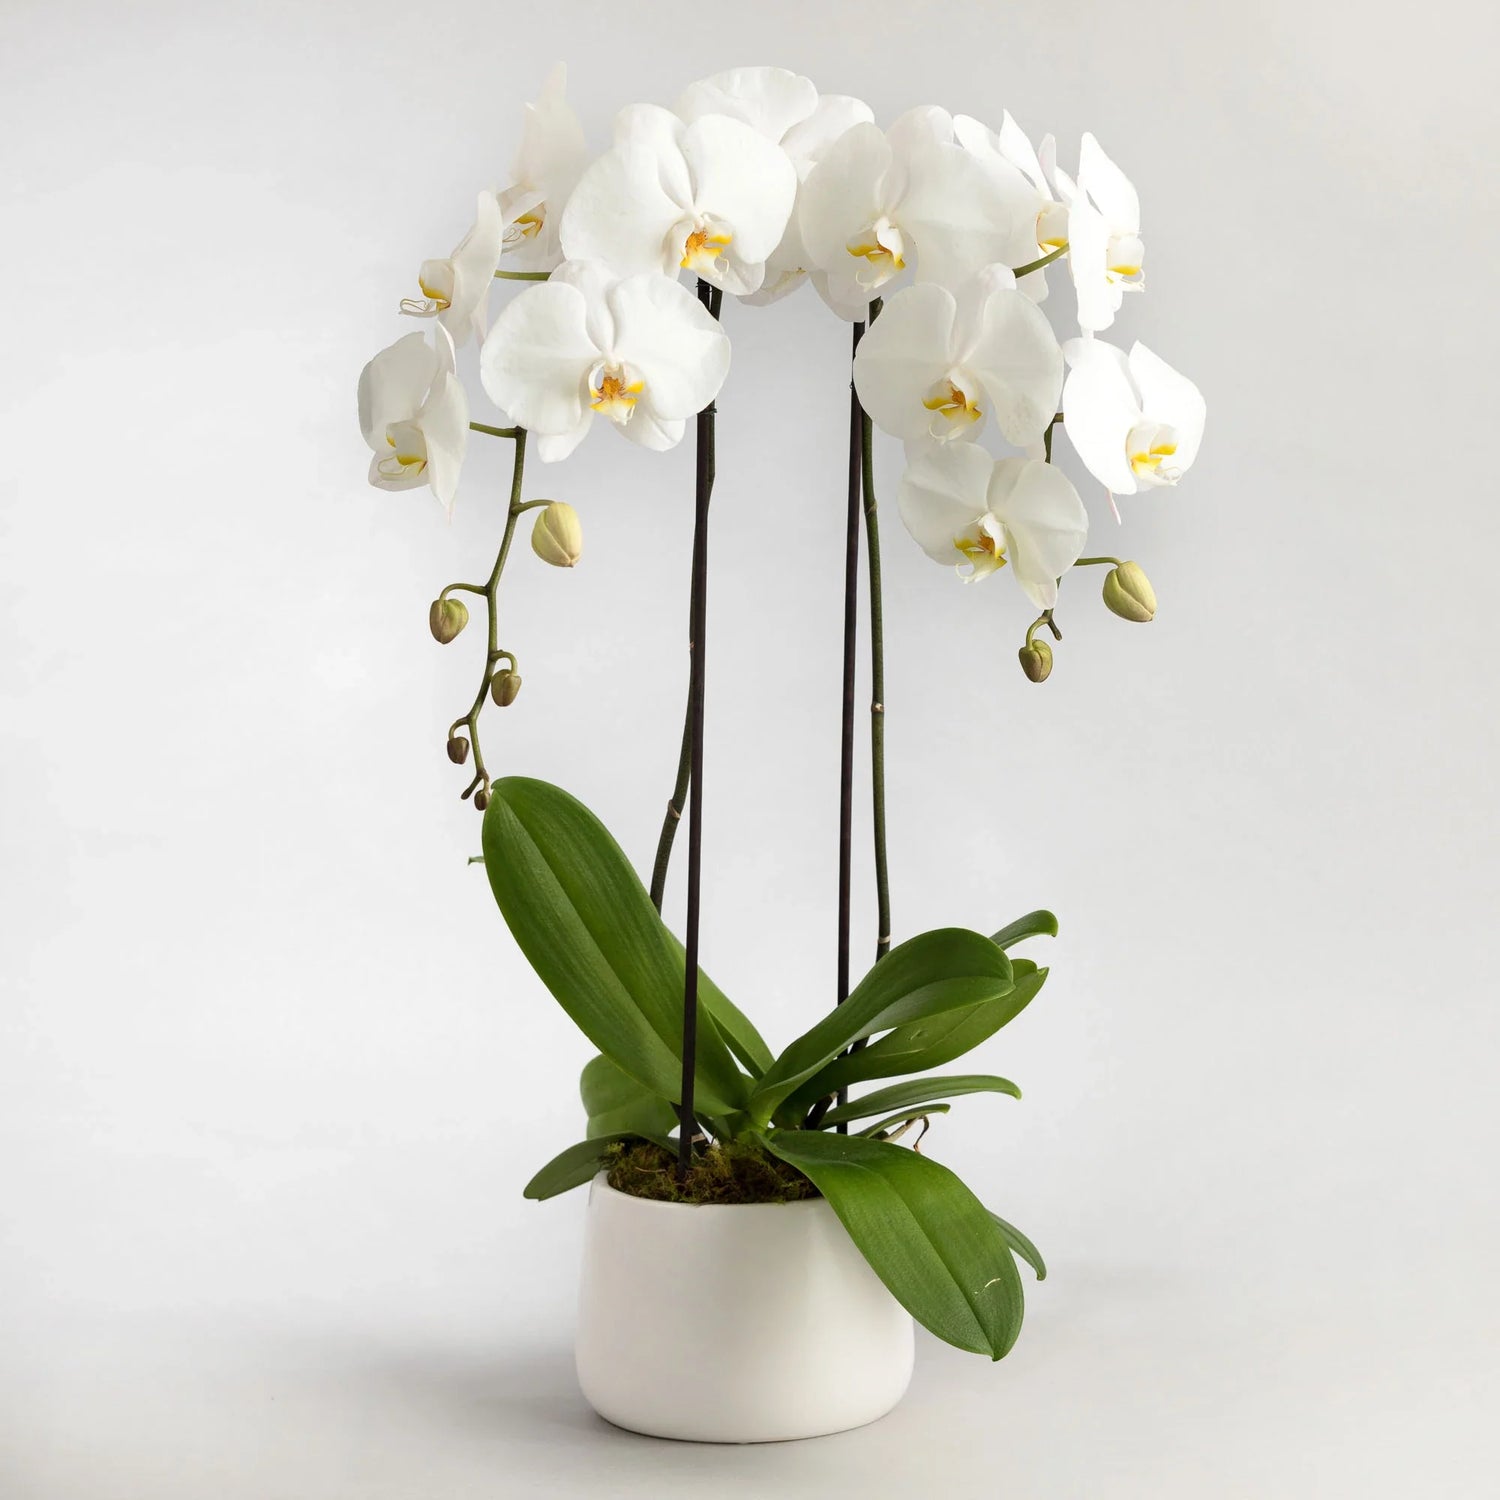 A potted plant of white phalaenopsis orchids in a white ceramic pot.